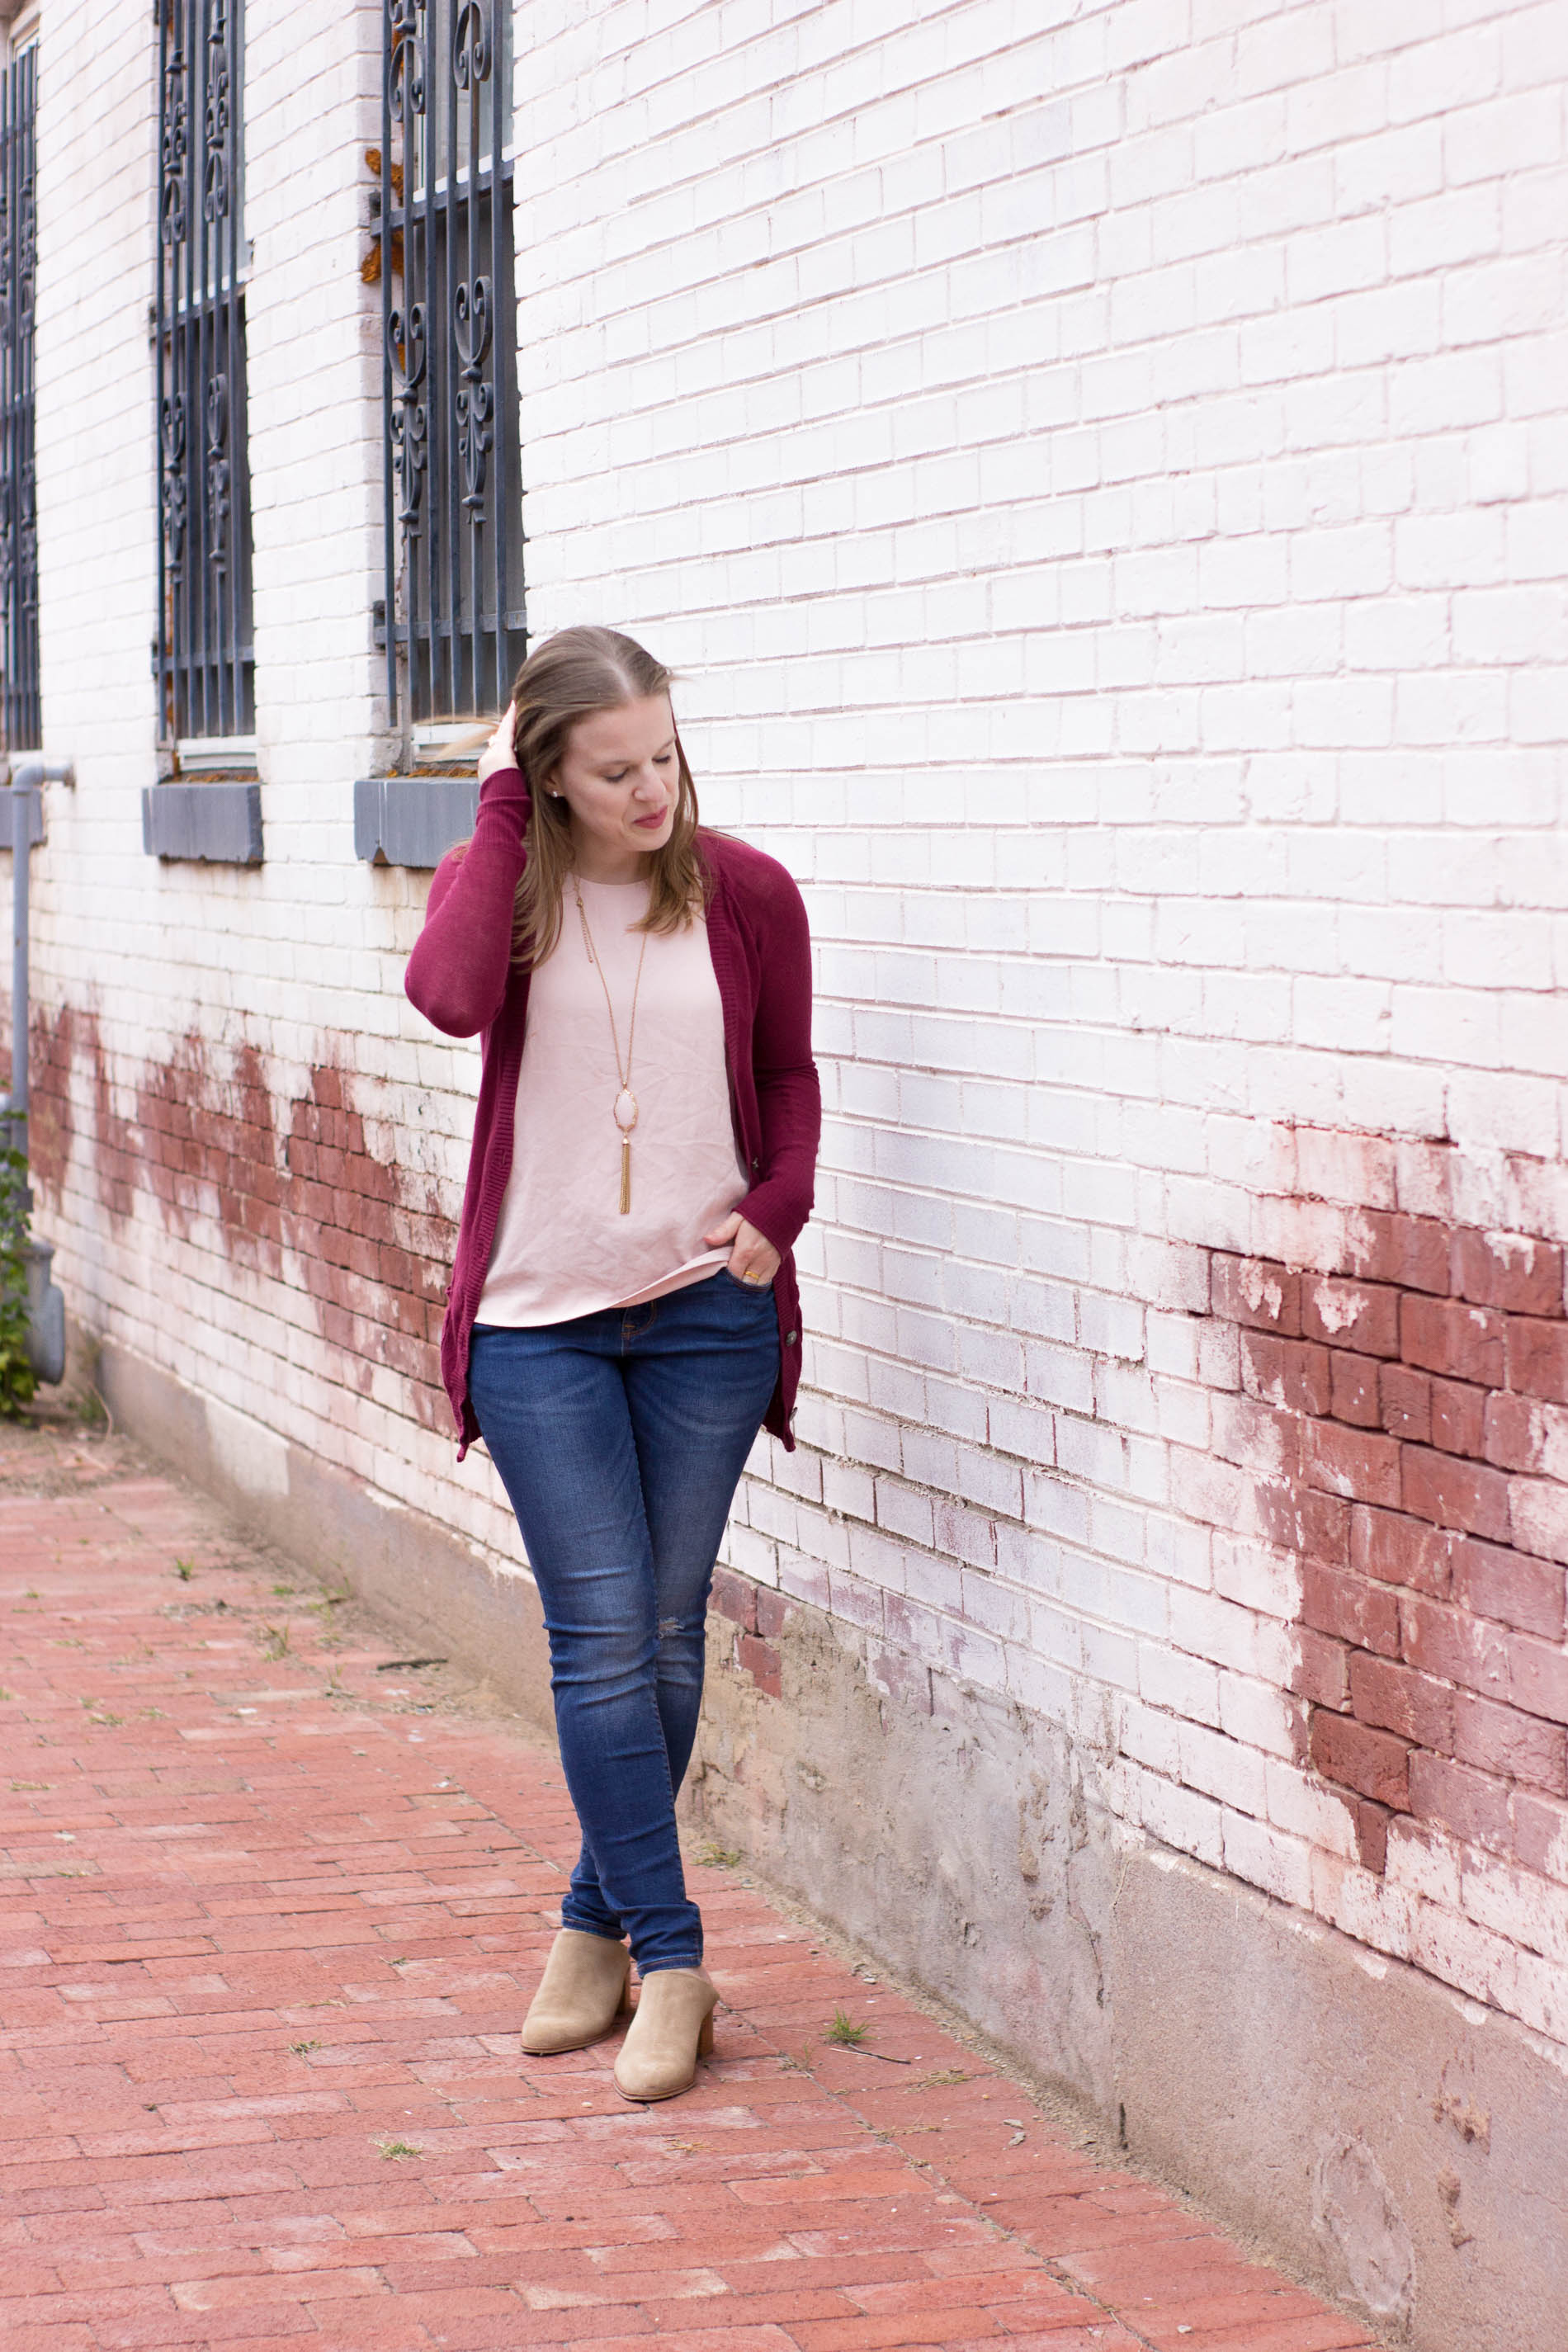 Embracing the Mules Trend | Something Good, @danaerinw , women, fashion, clothing, style, clothes, fall fashion, women's style, ripped jeans, ripped denim, pesky whipper-snapper pink, burgundy, cranberry, long cardigan, pink tank